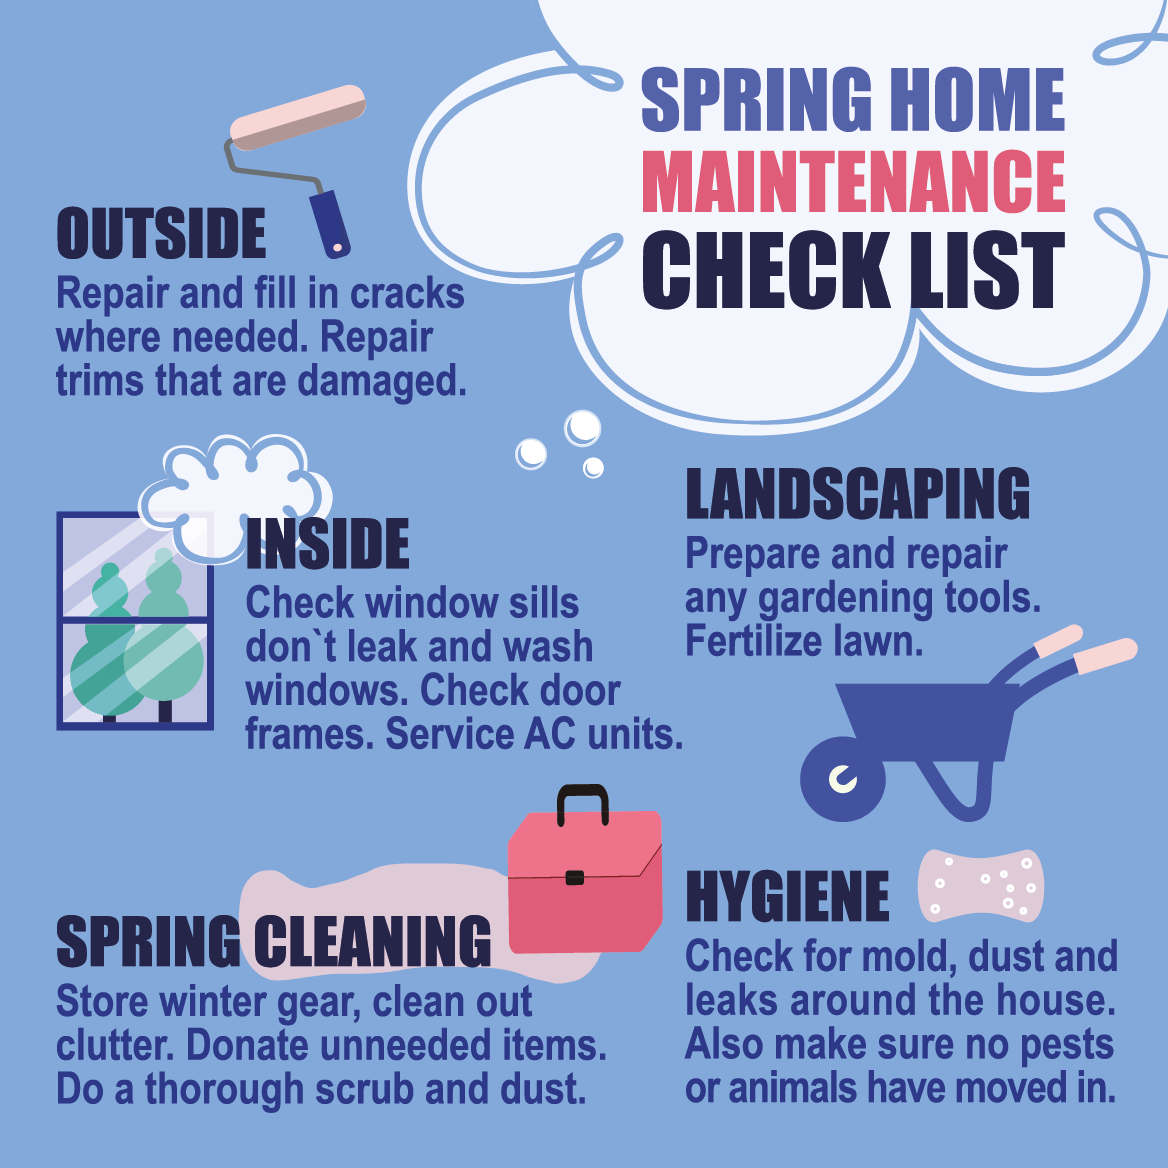 SIX THINGS EVERY HOMEOWNER SHOULD DO THIS SPRING